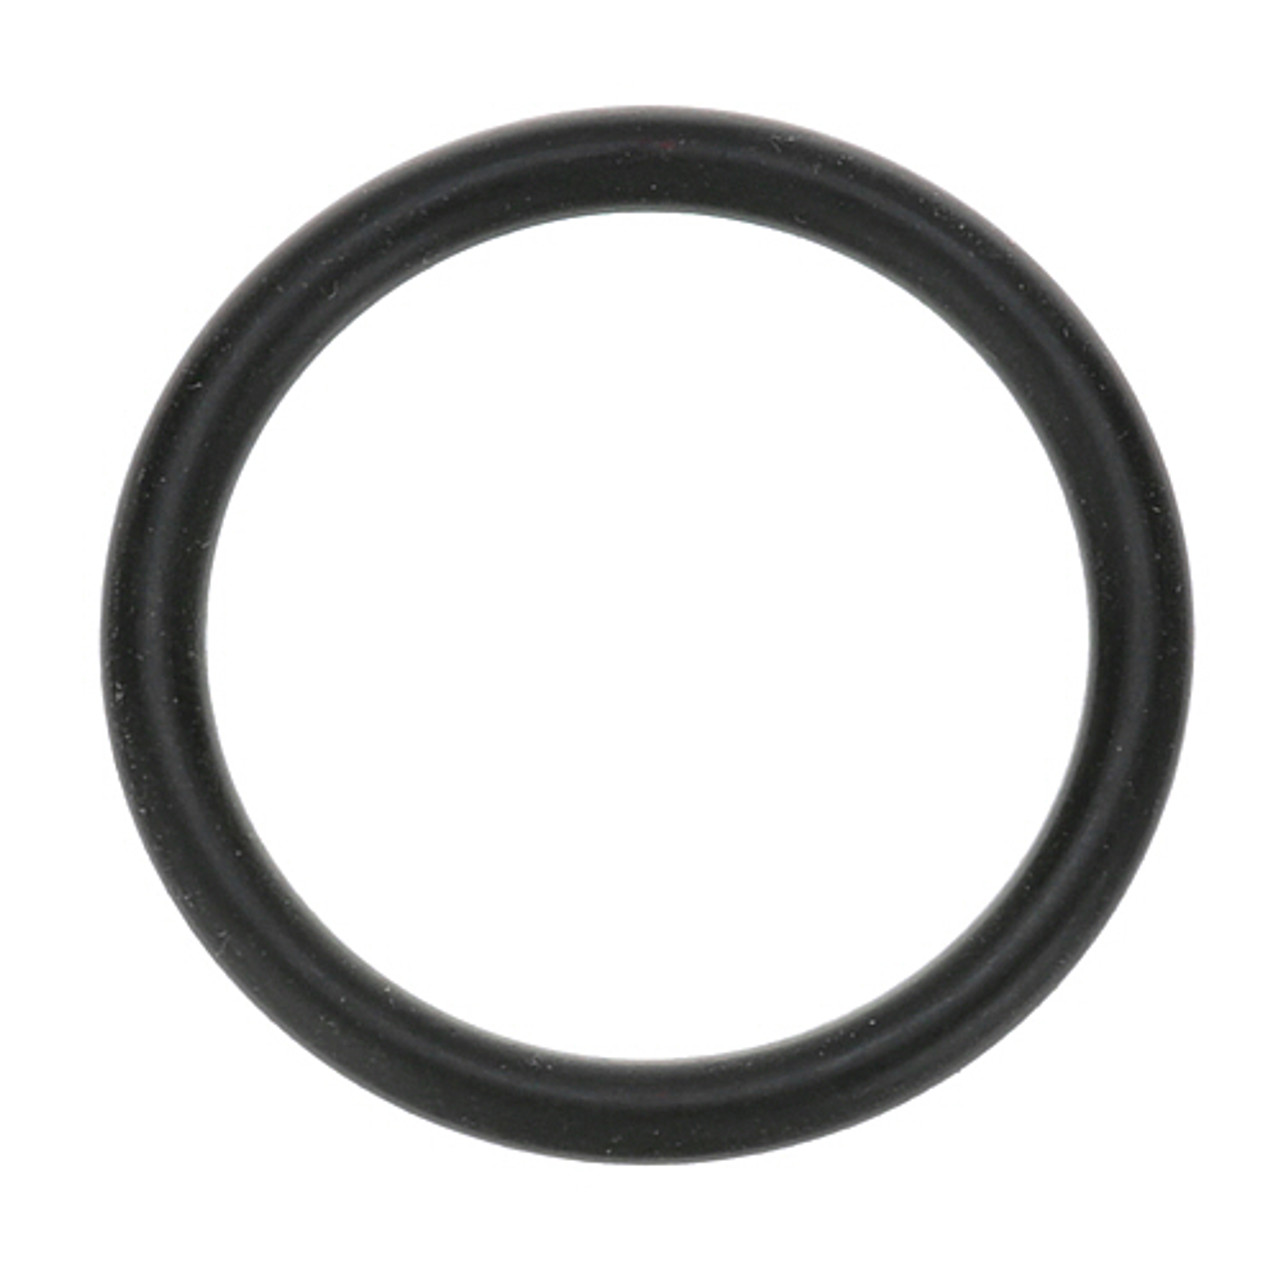 O-Ring 1-1/8" Id X 1/8" Width - Replacement Part For Stoelting 624677